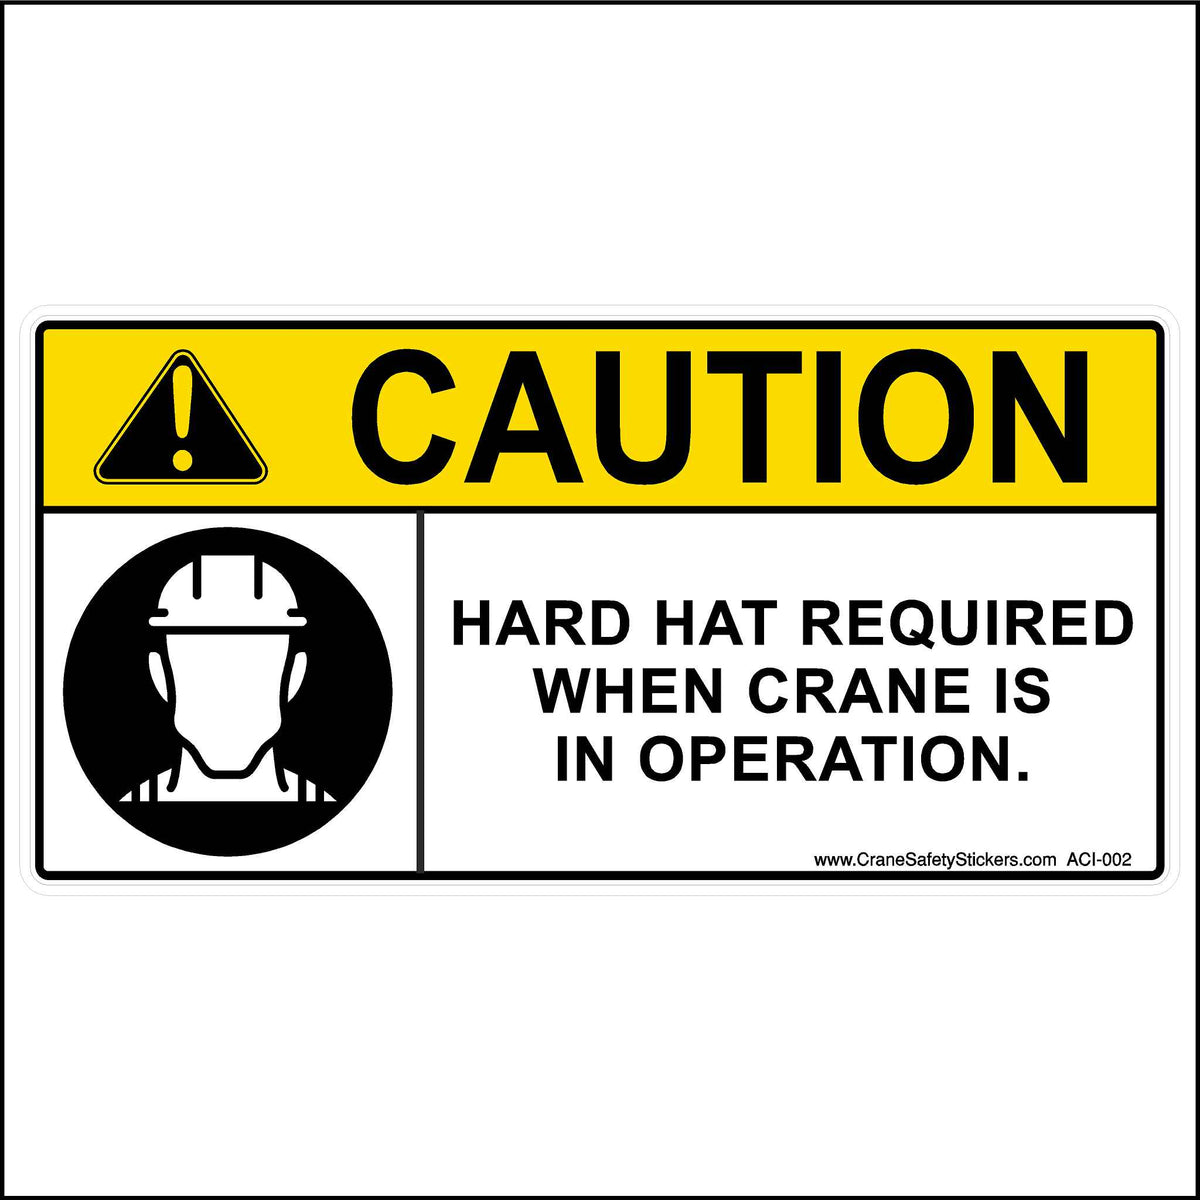 Crane Safety Sign Caution Hard Hat Required When Crane Is In Operation.